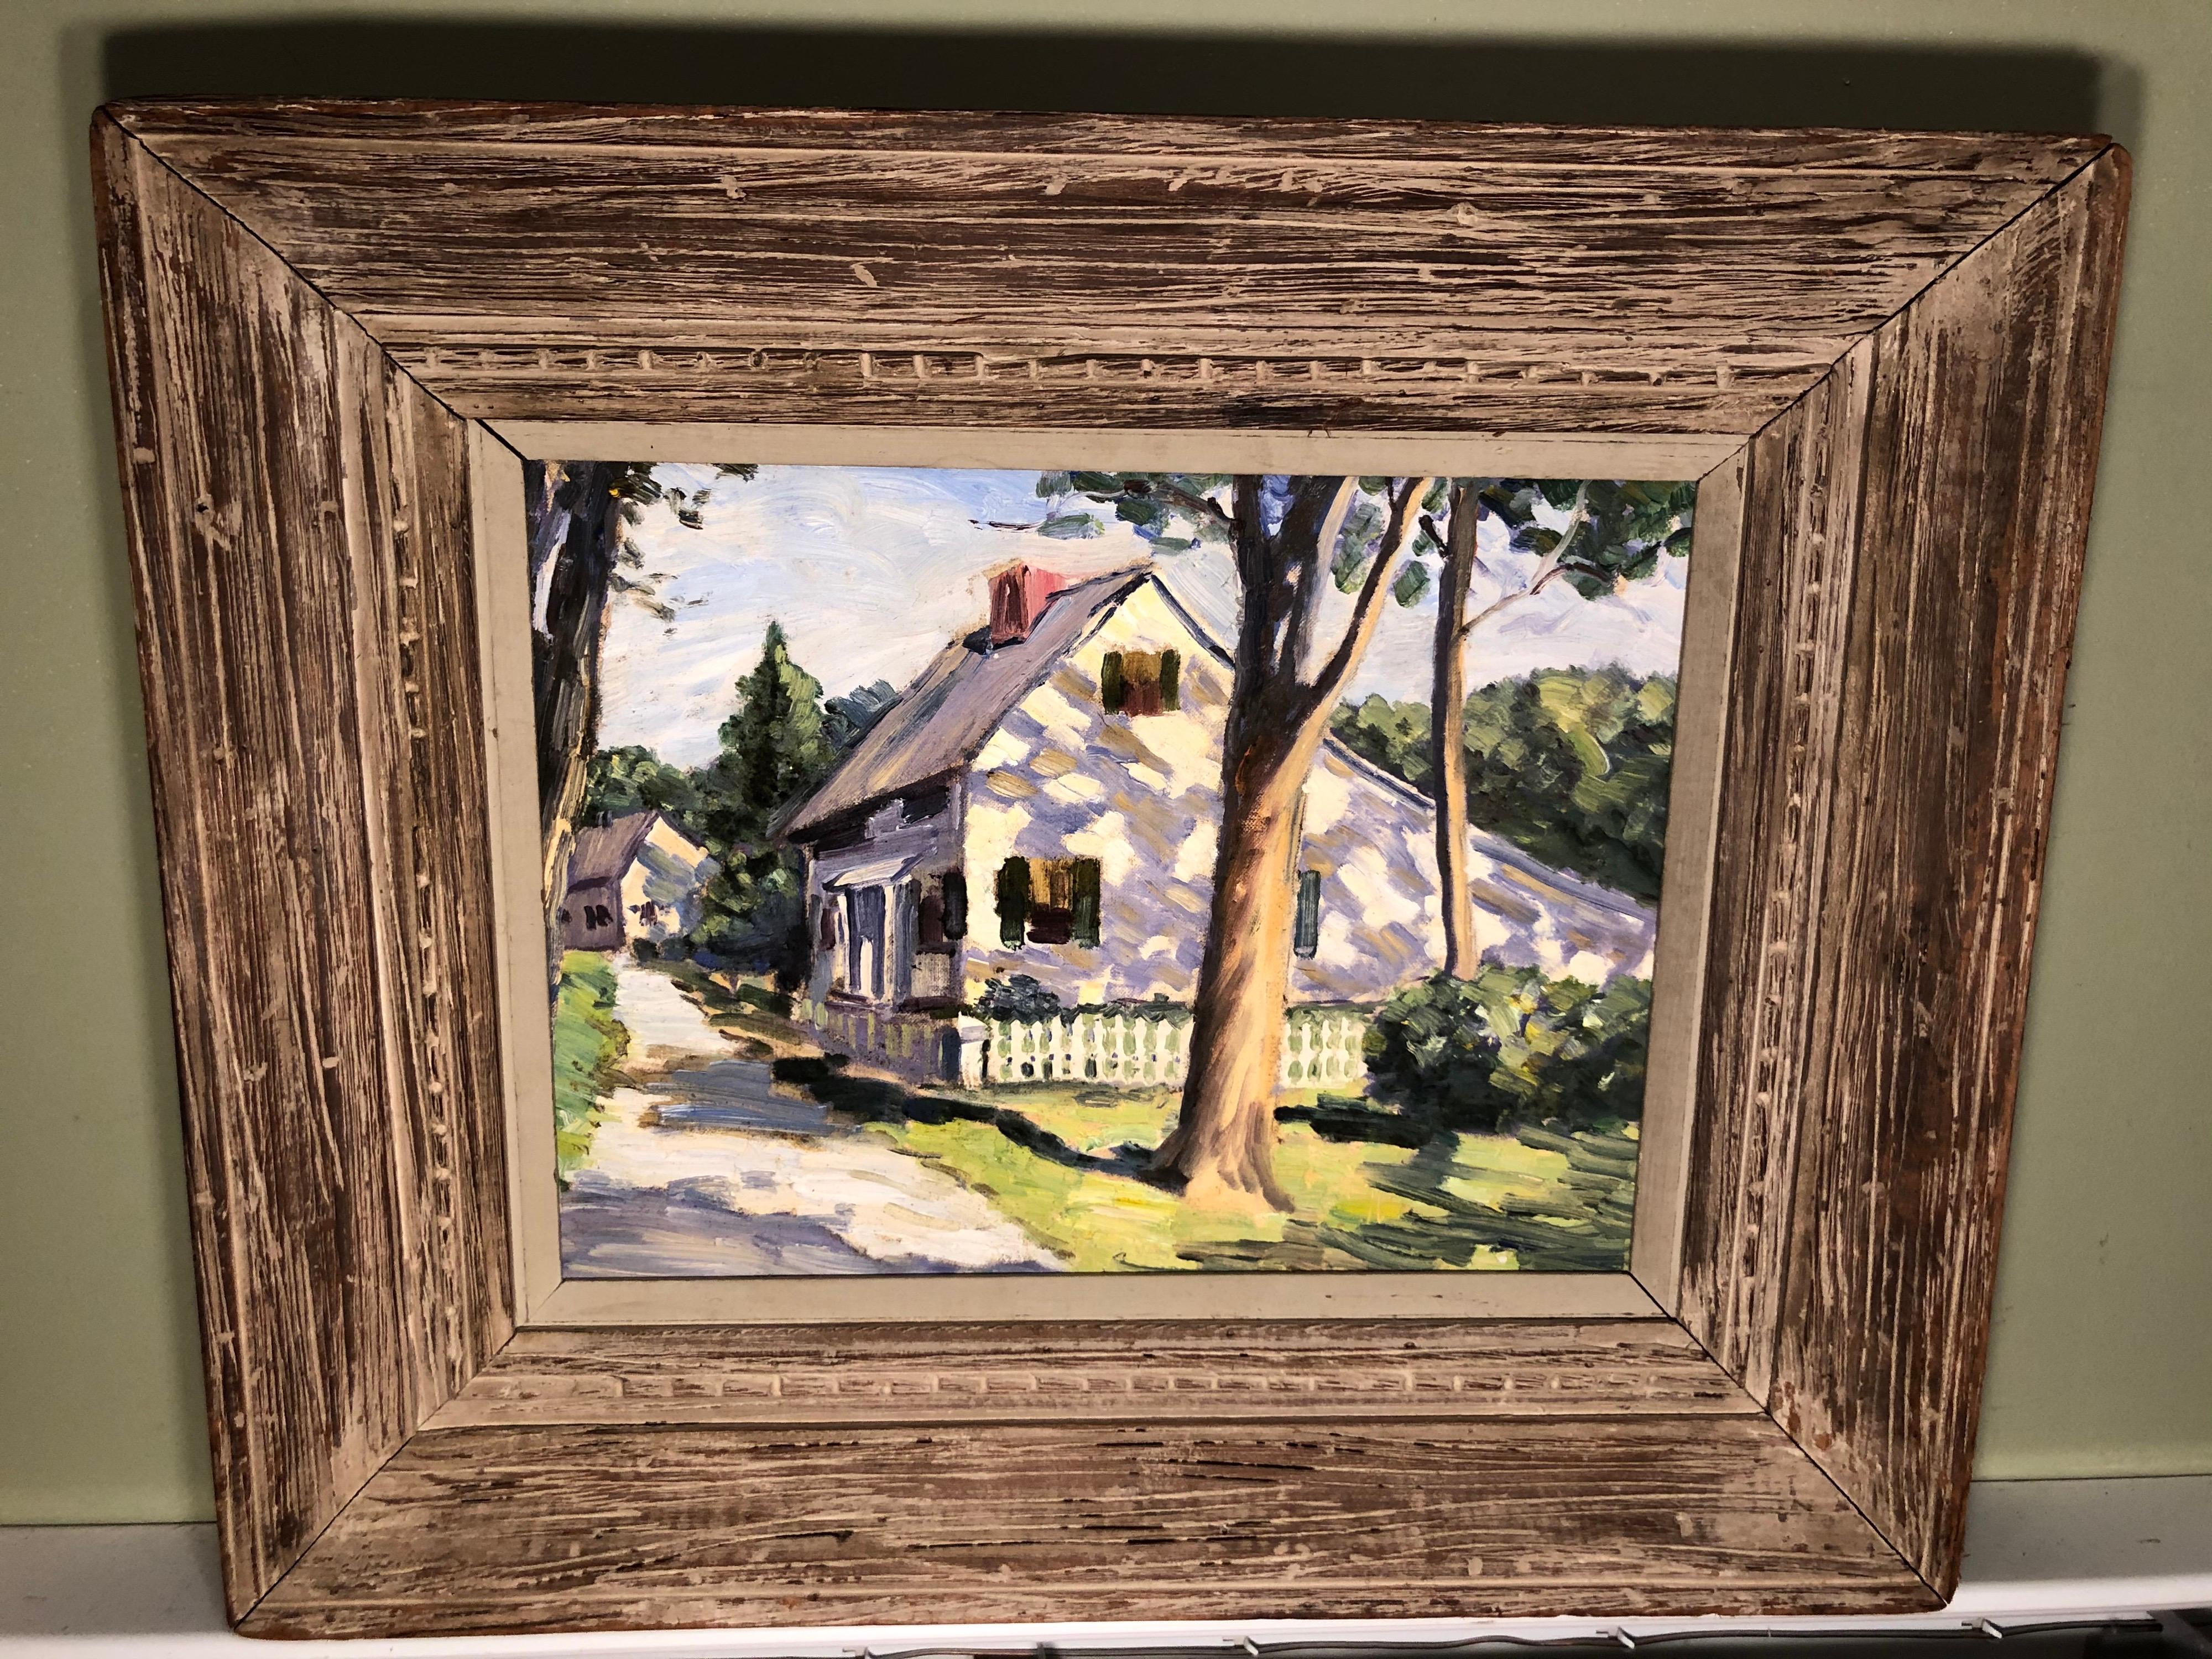 New England Summer Home Painting. Classic Americana of a cape house in the summer. Oil on canvas house in a very thick, solid wooden frame.